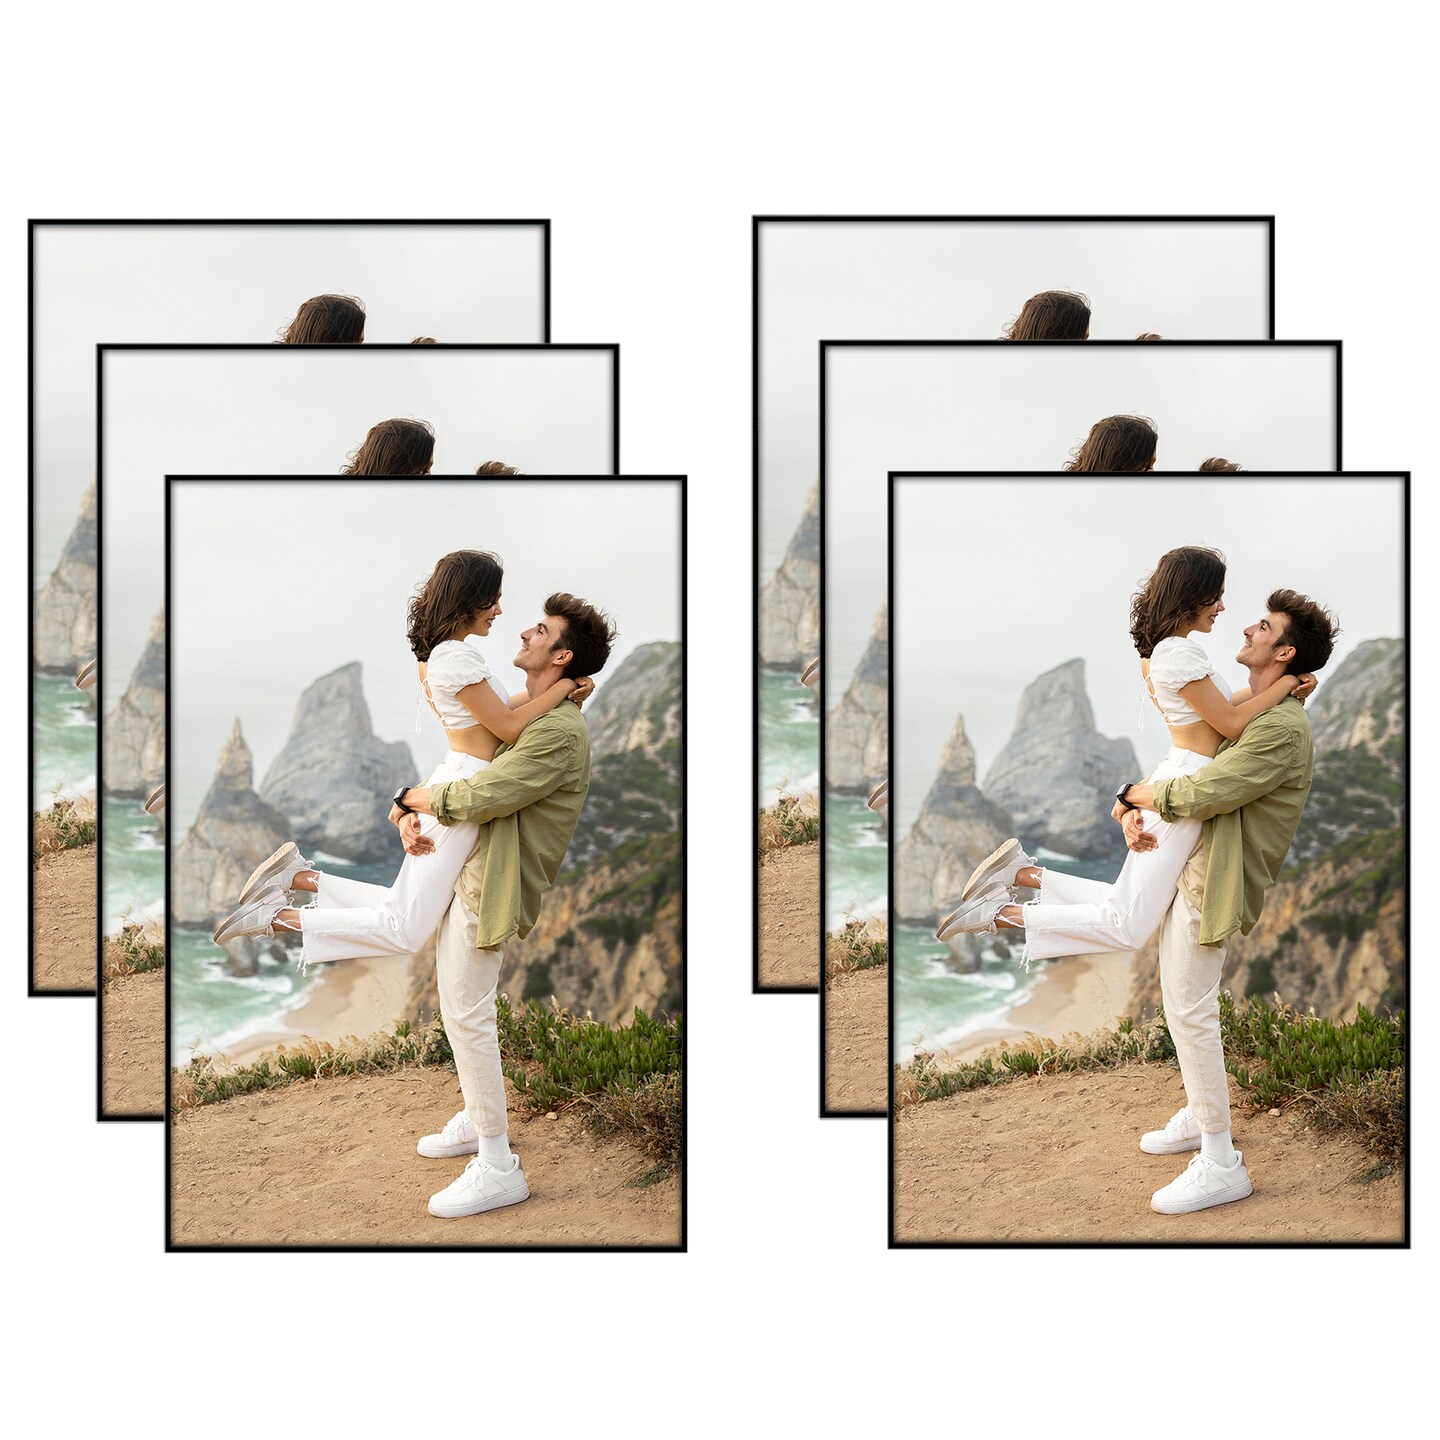 Americanflat Front Loading Picture Frame Set - Set of 6- Multi Picture Frames - Perfect for Photos and Wall Decor - Shatter Resistant Glass - Hanging Hardware with Snap-Out Easel